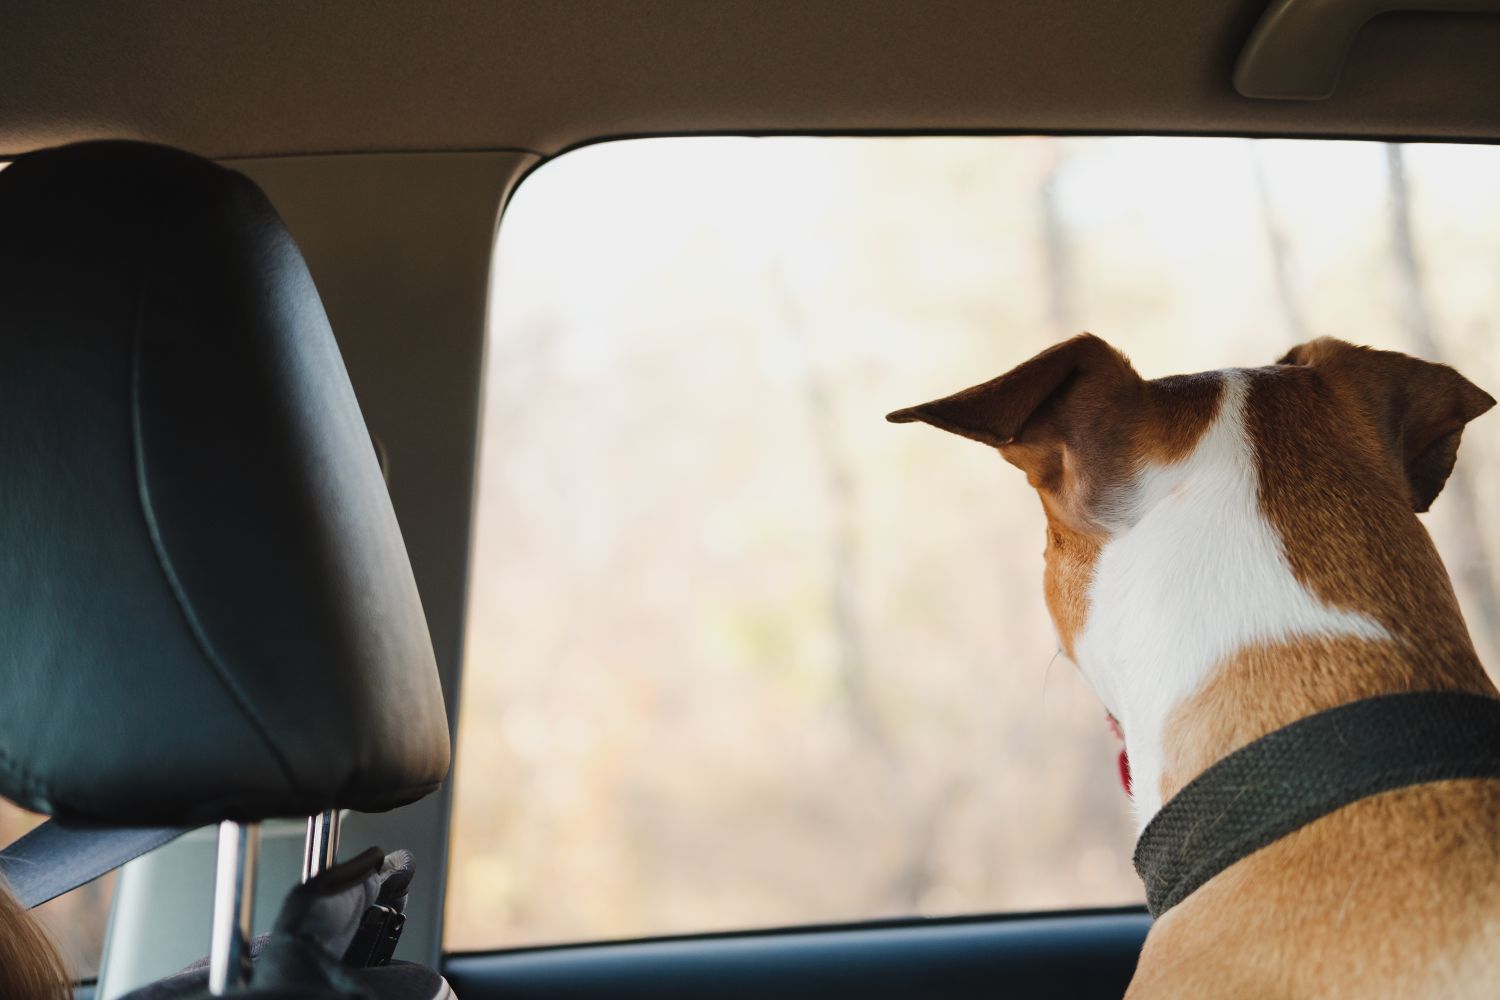 Dog looks out window from inside car